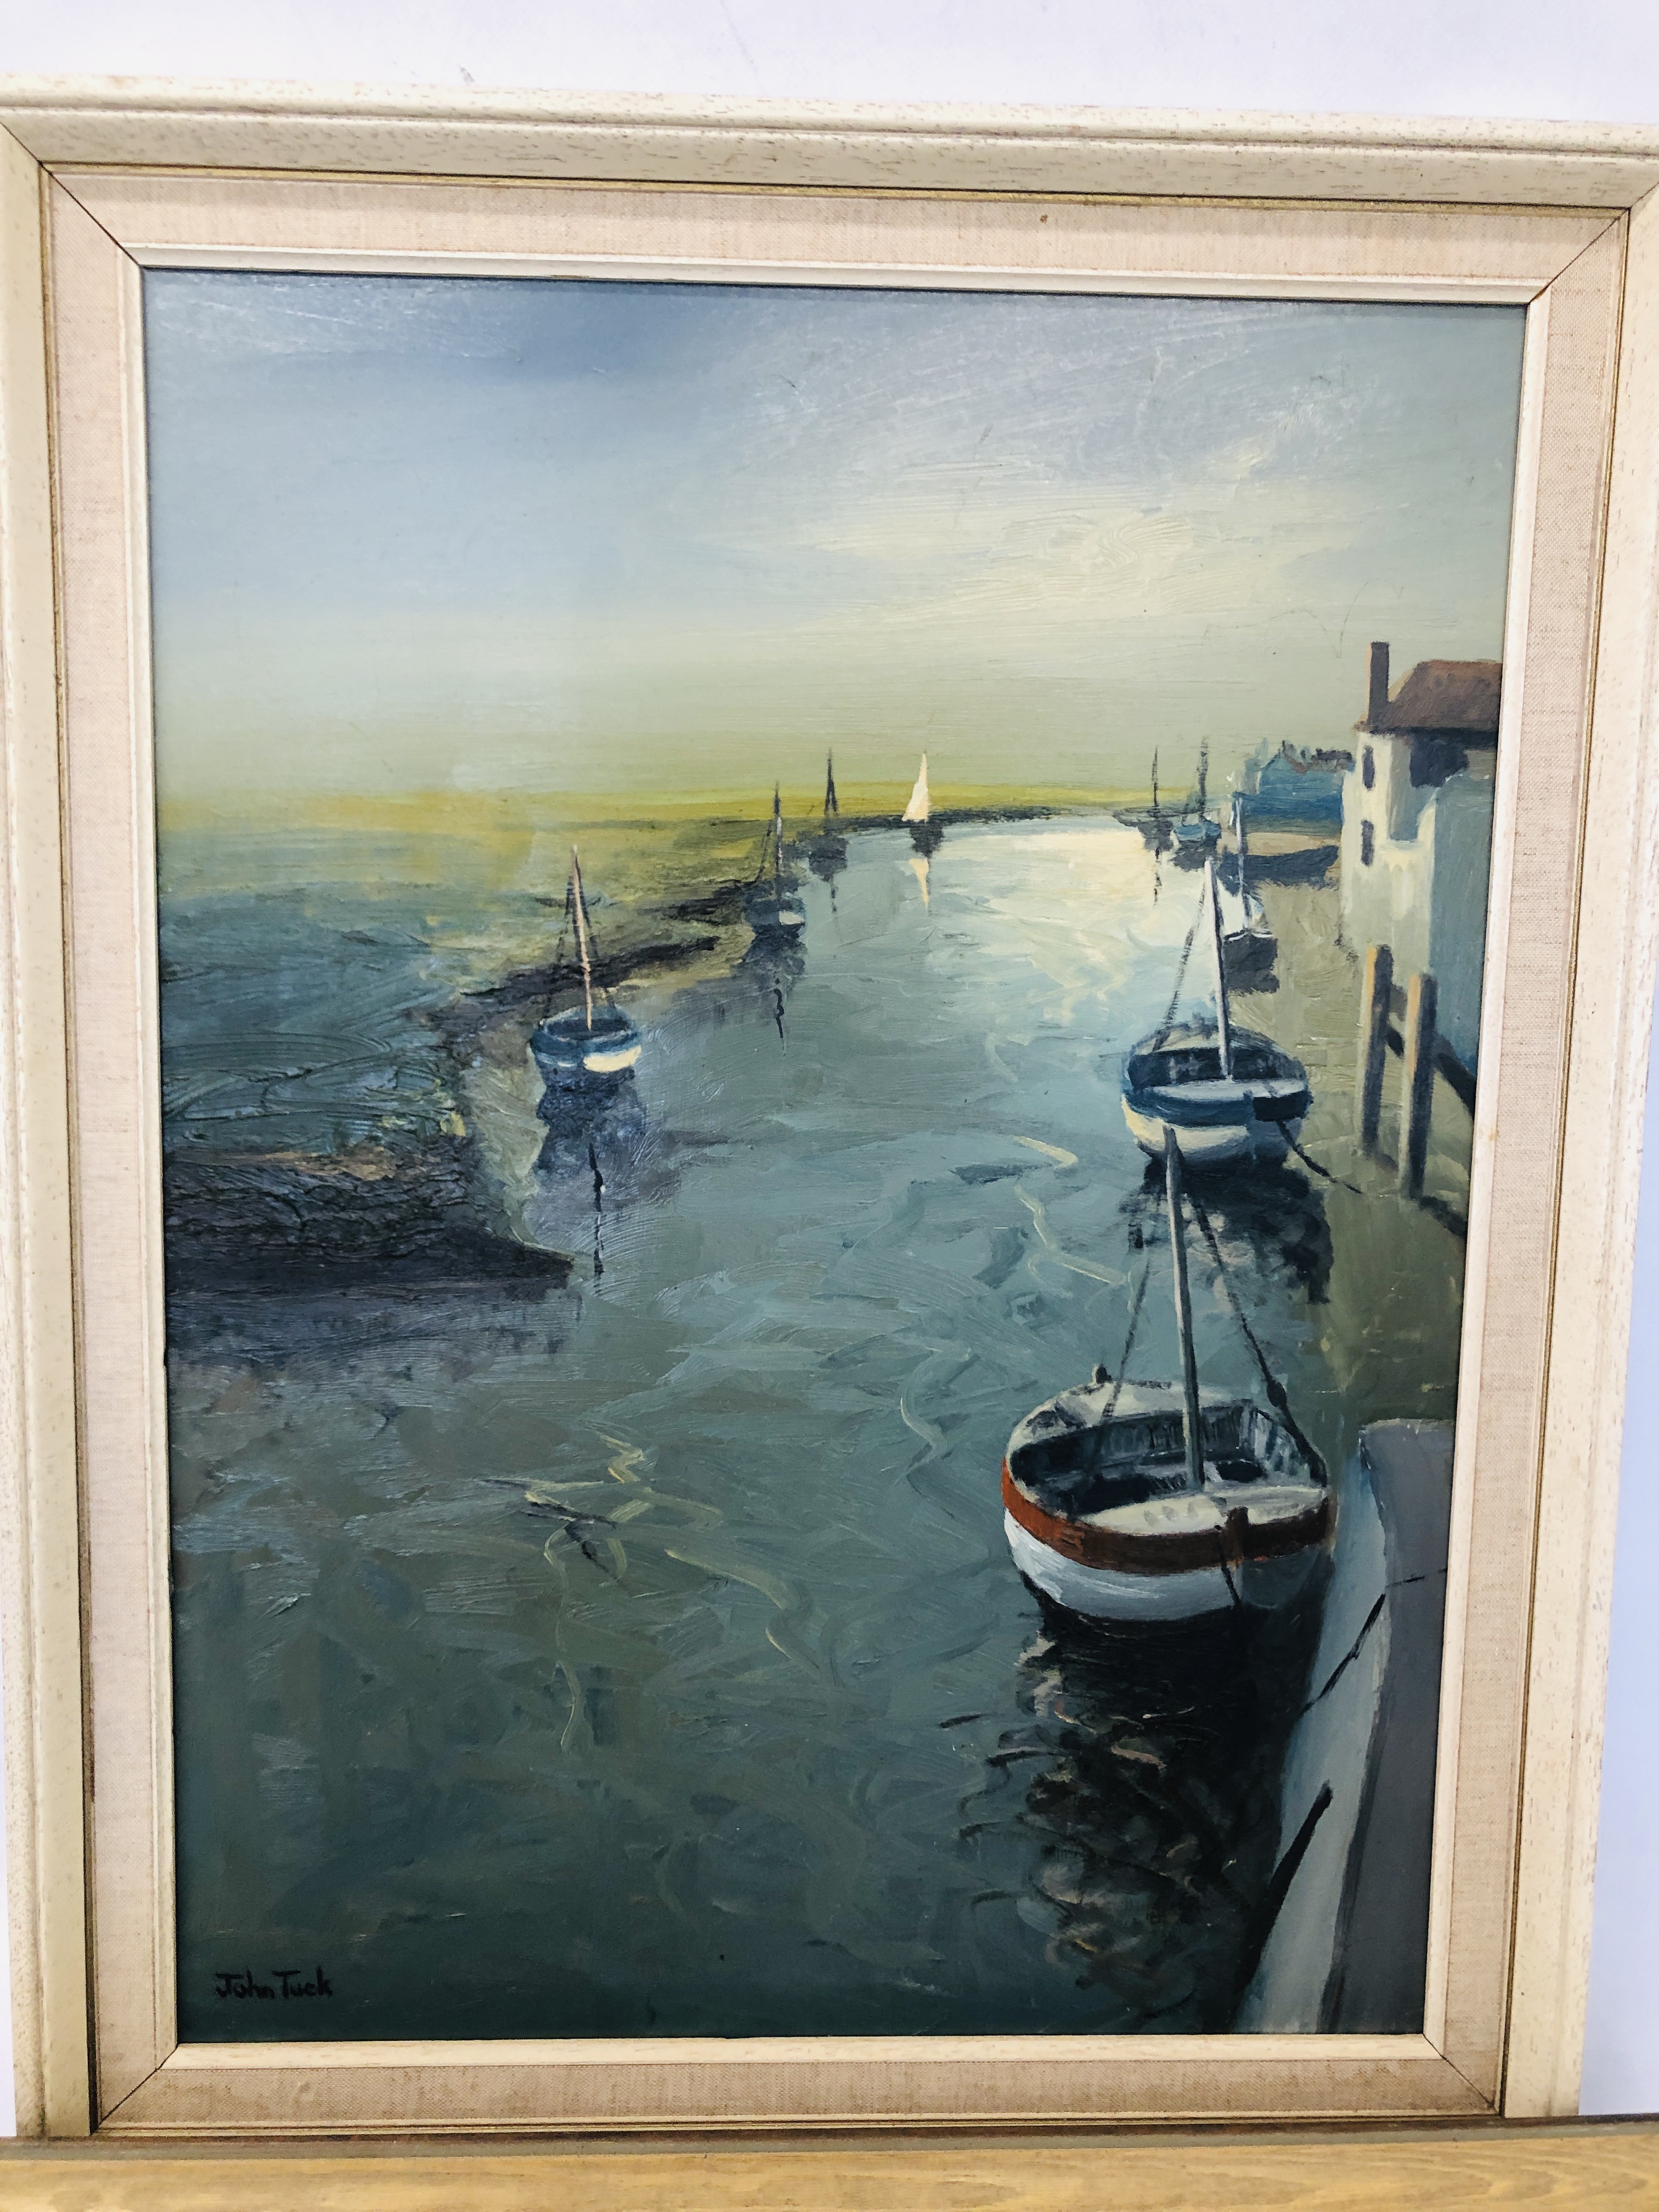 2 FRAMED JOHN TUCK OIL ON BOARD PAINTINGS OF WELLS HARBOUR AND BURNHAM OVERY STAITHE 44 X 59CM. - Image 4 of 6